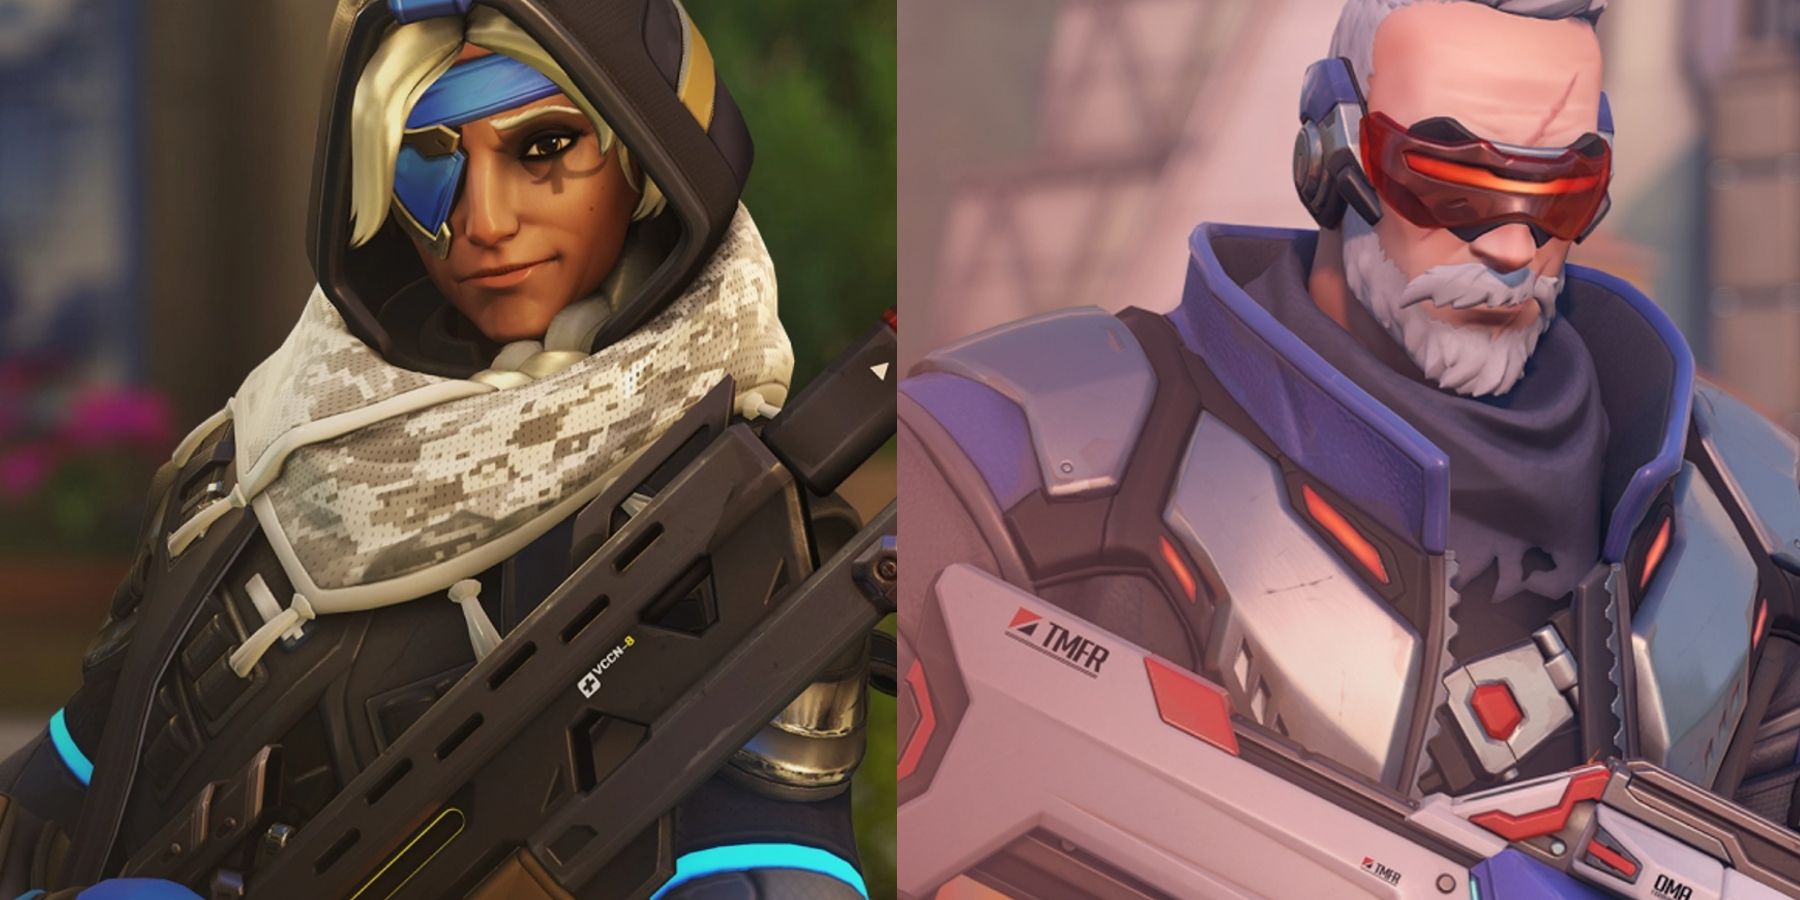 Ana and Soldier 76 Overwatch 2 Side-by-side